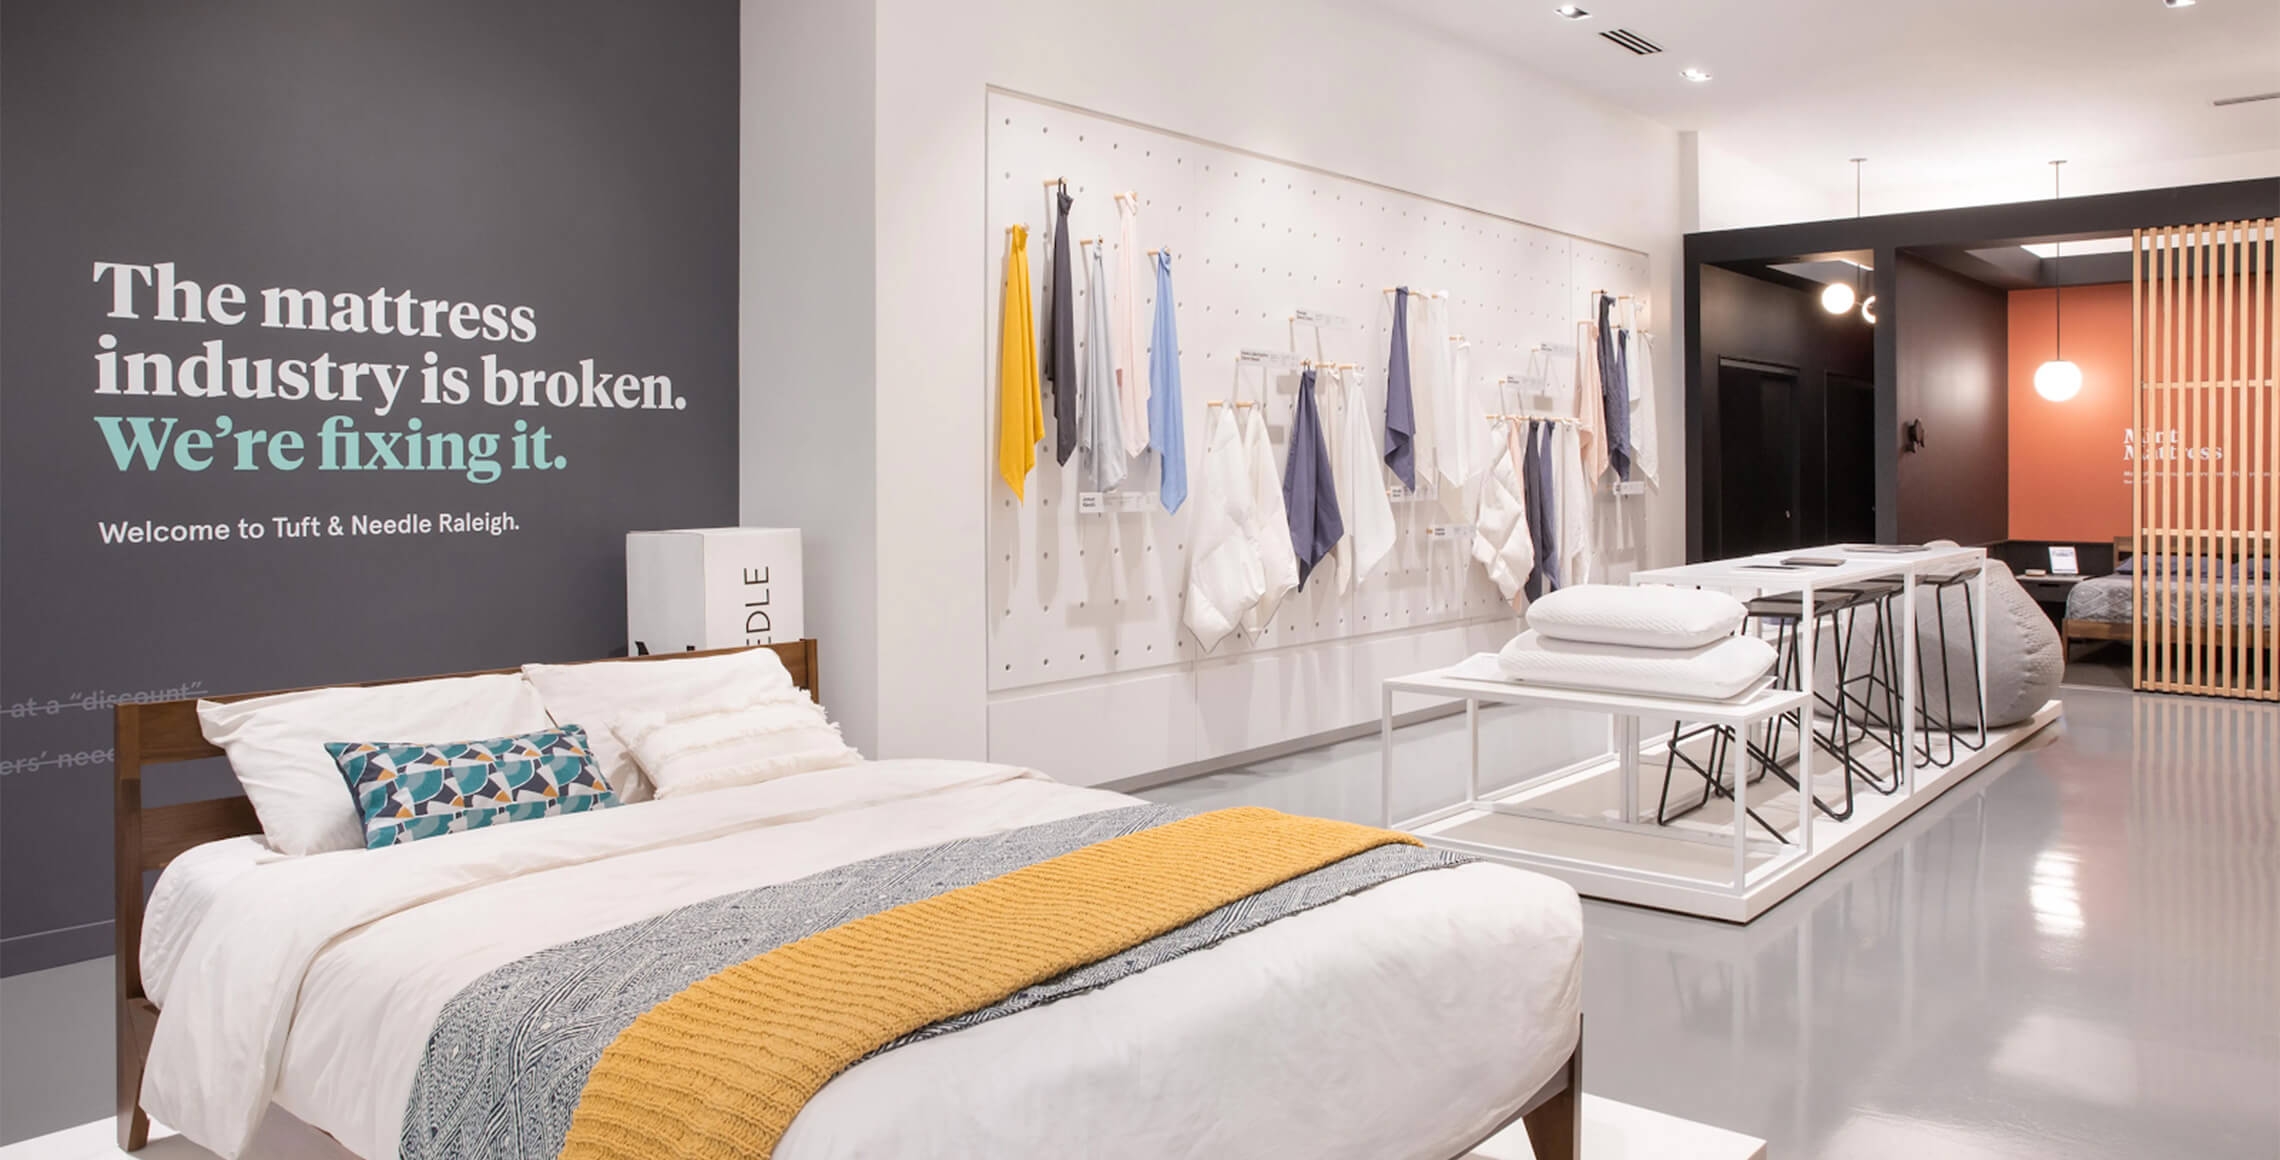 7 Customer Experience Tips For D2C Brands Breaking Into Brick-and-Mortar